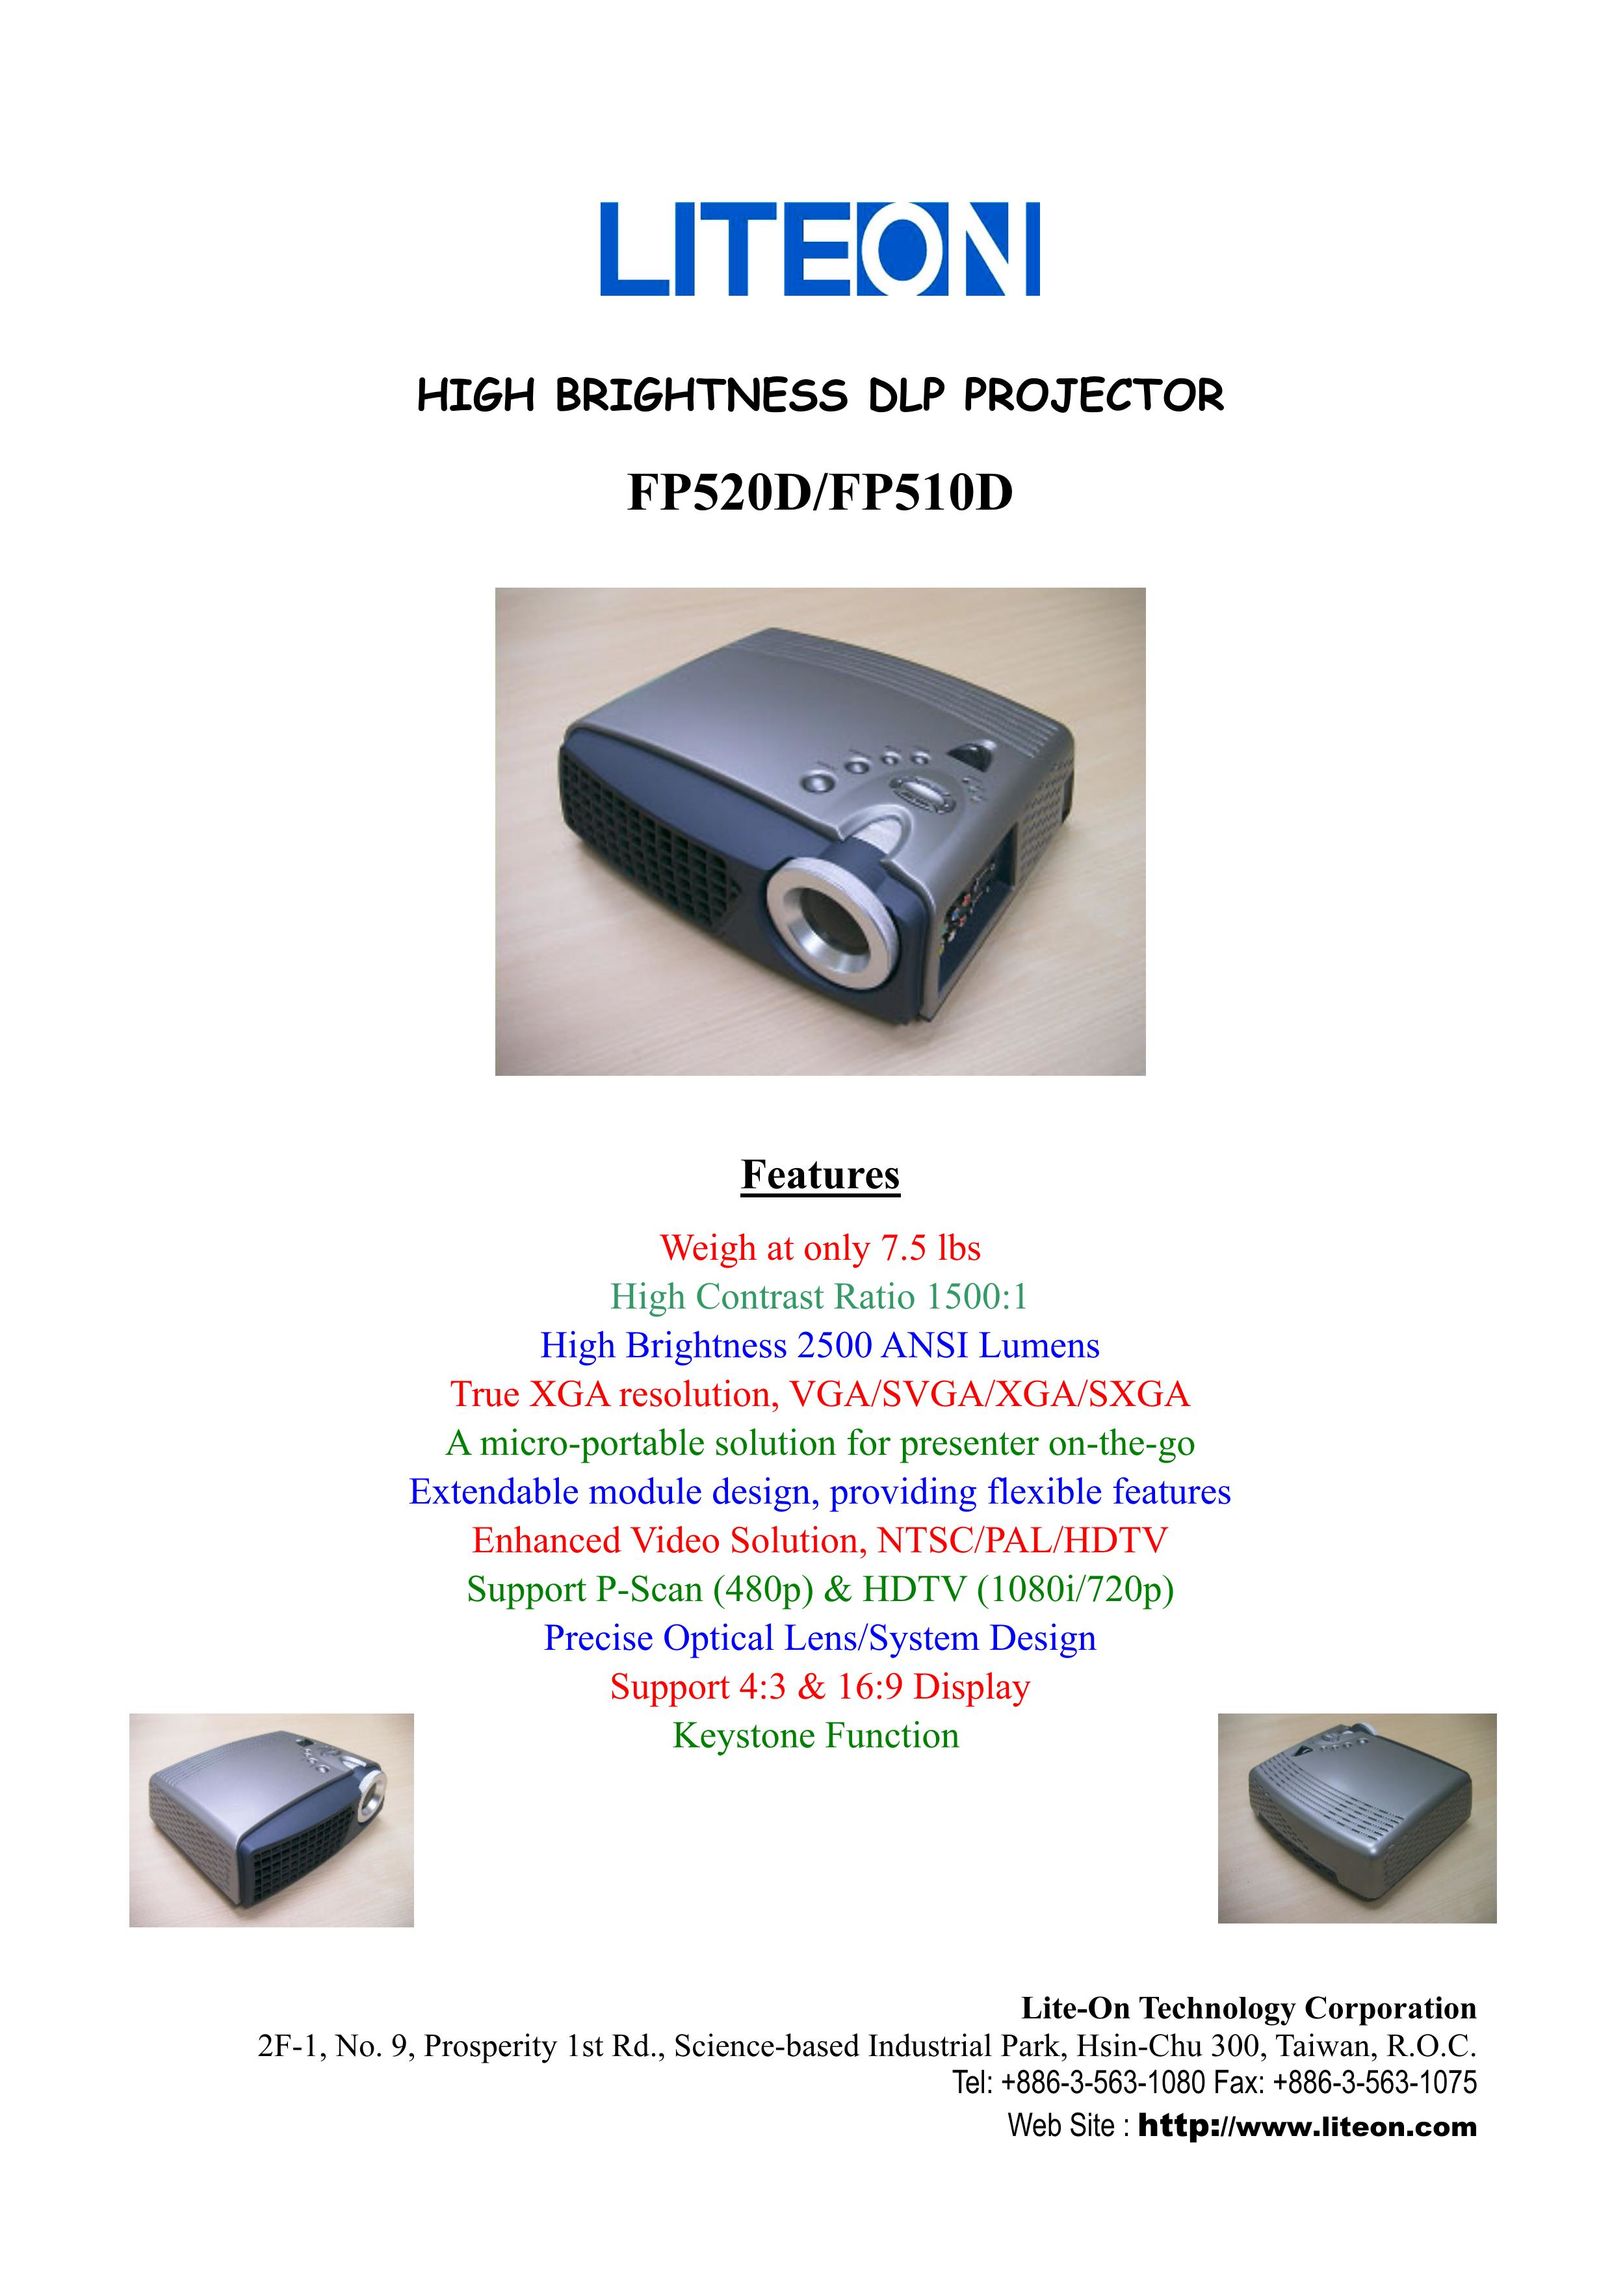 Lite-On FP510D Projector User Manual